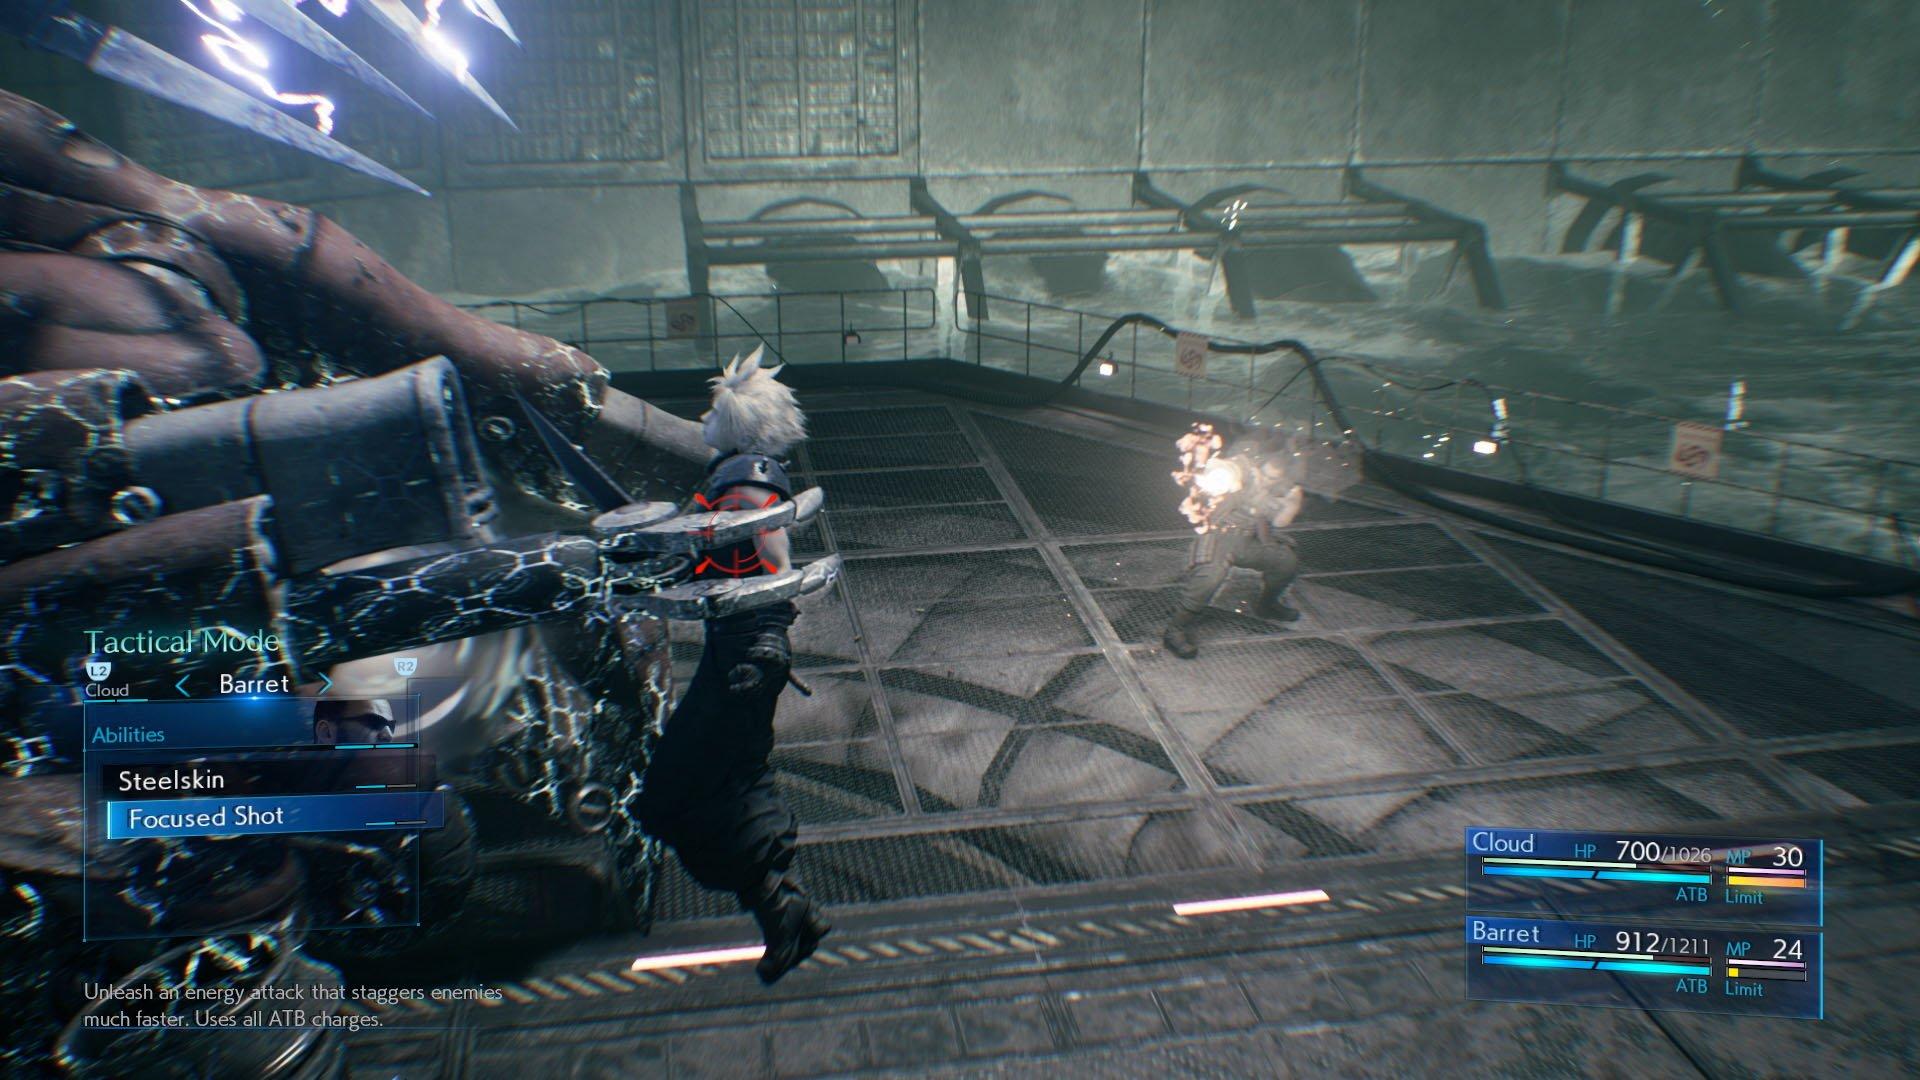 Final Fantasy 7 Remake playable at PAX East, public PS4 demo incoming?